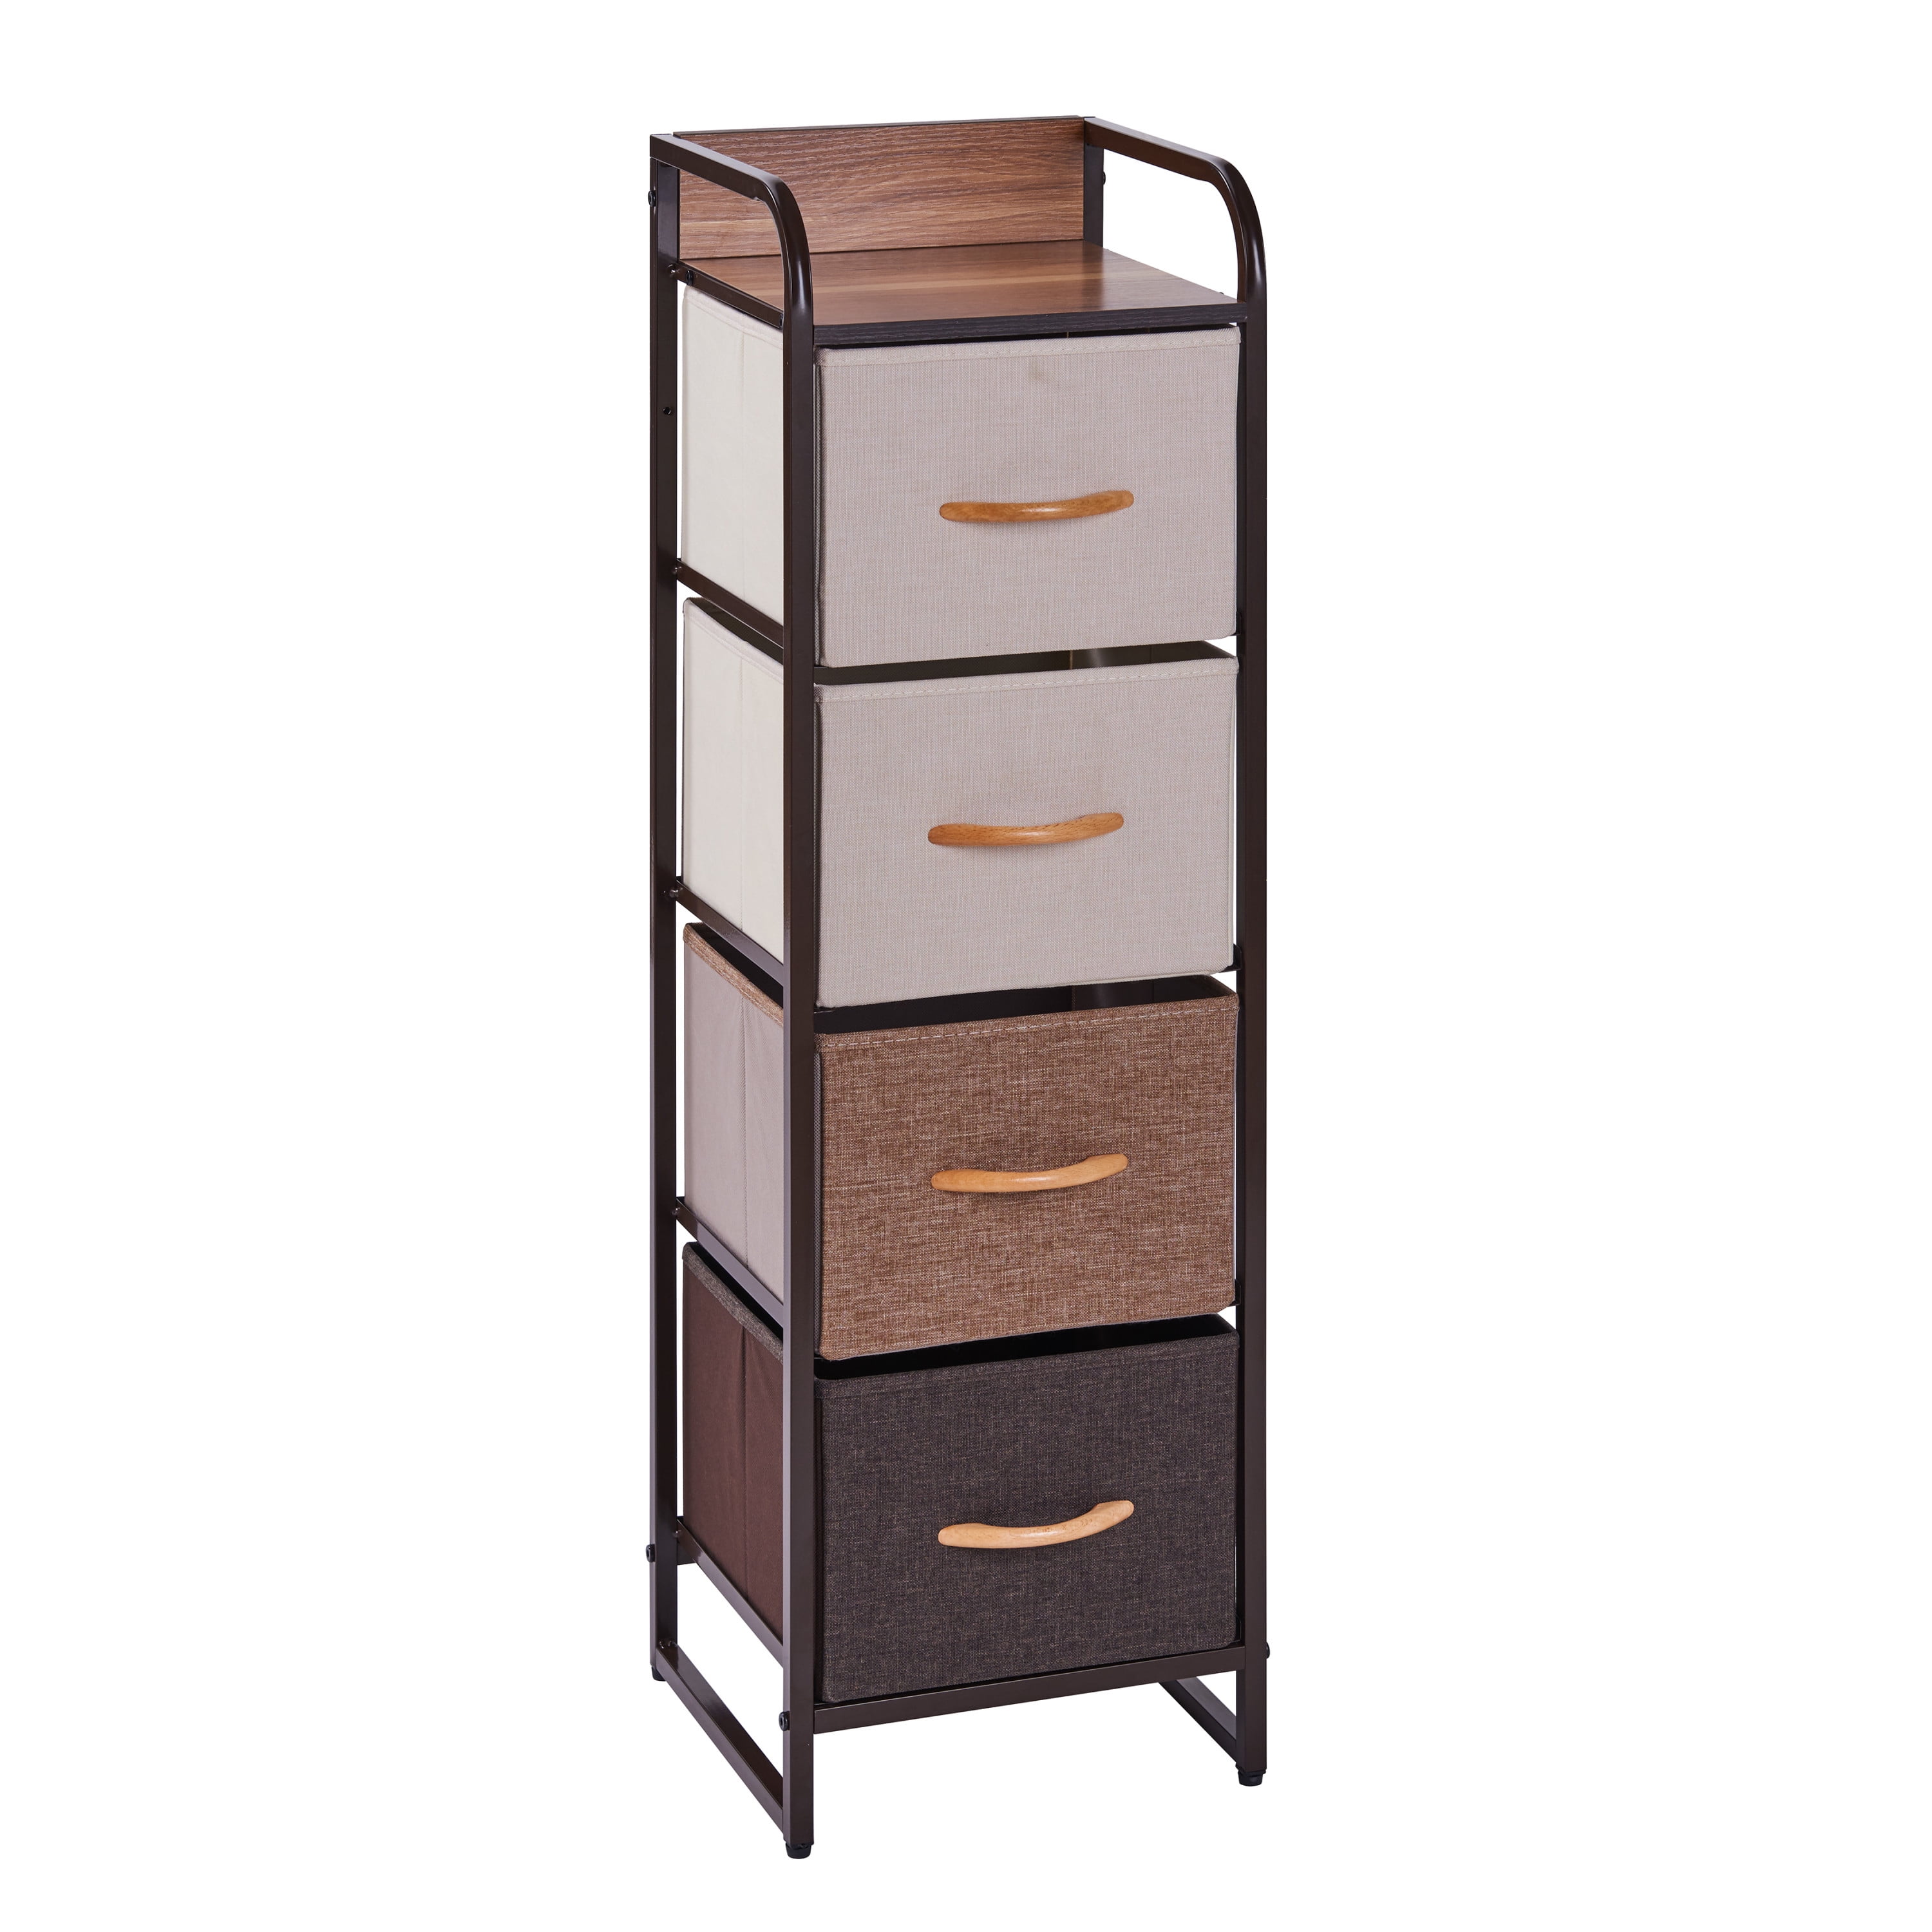 Narrow Dresser Chest Storage Tower, Narrow Dressers For Small Spaces